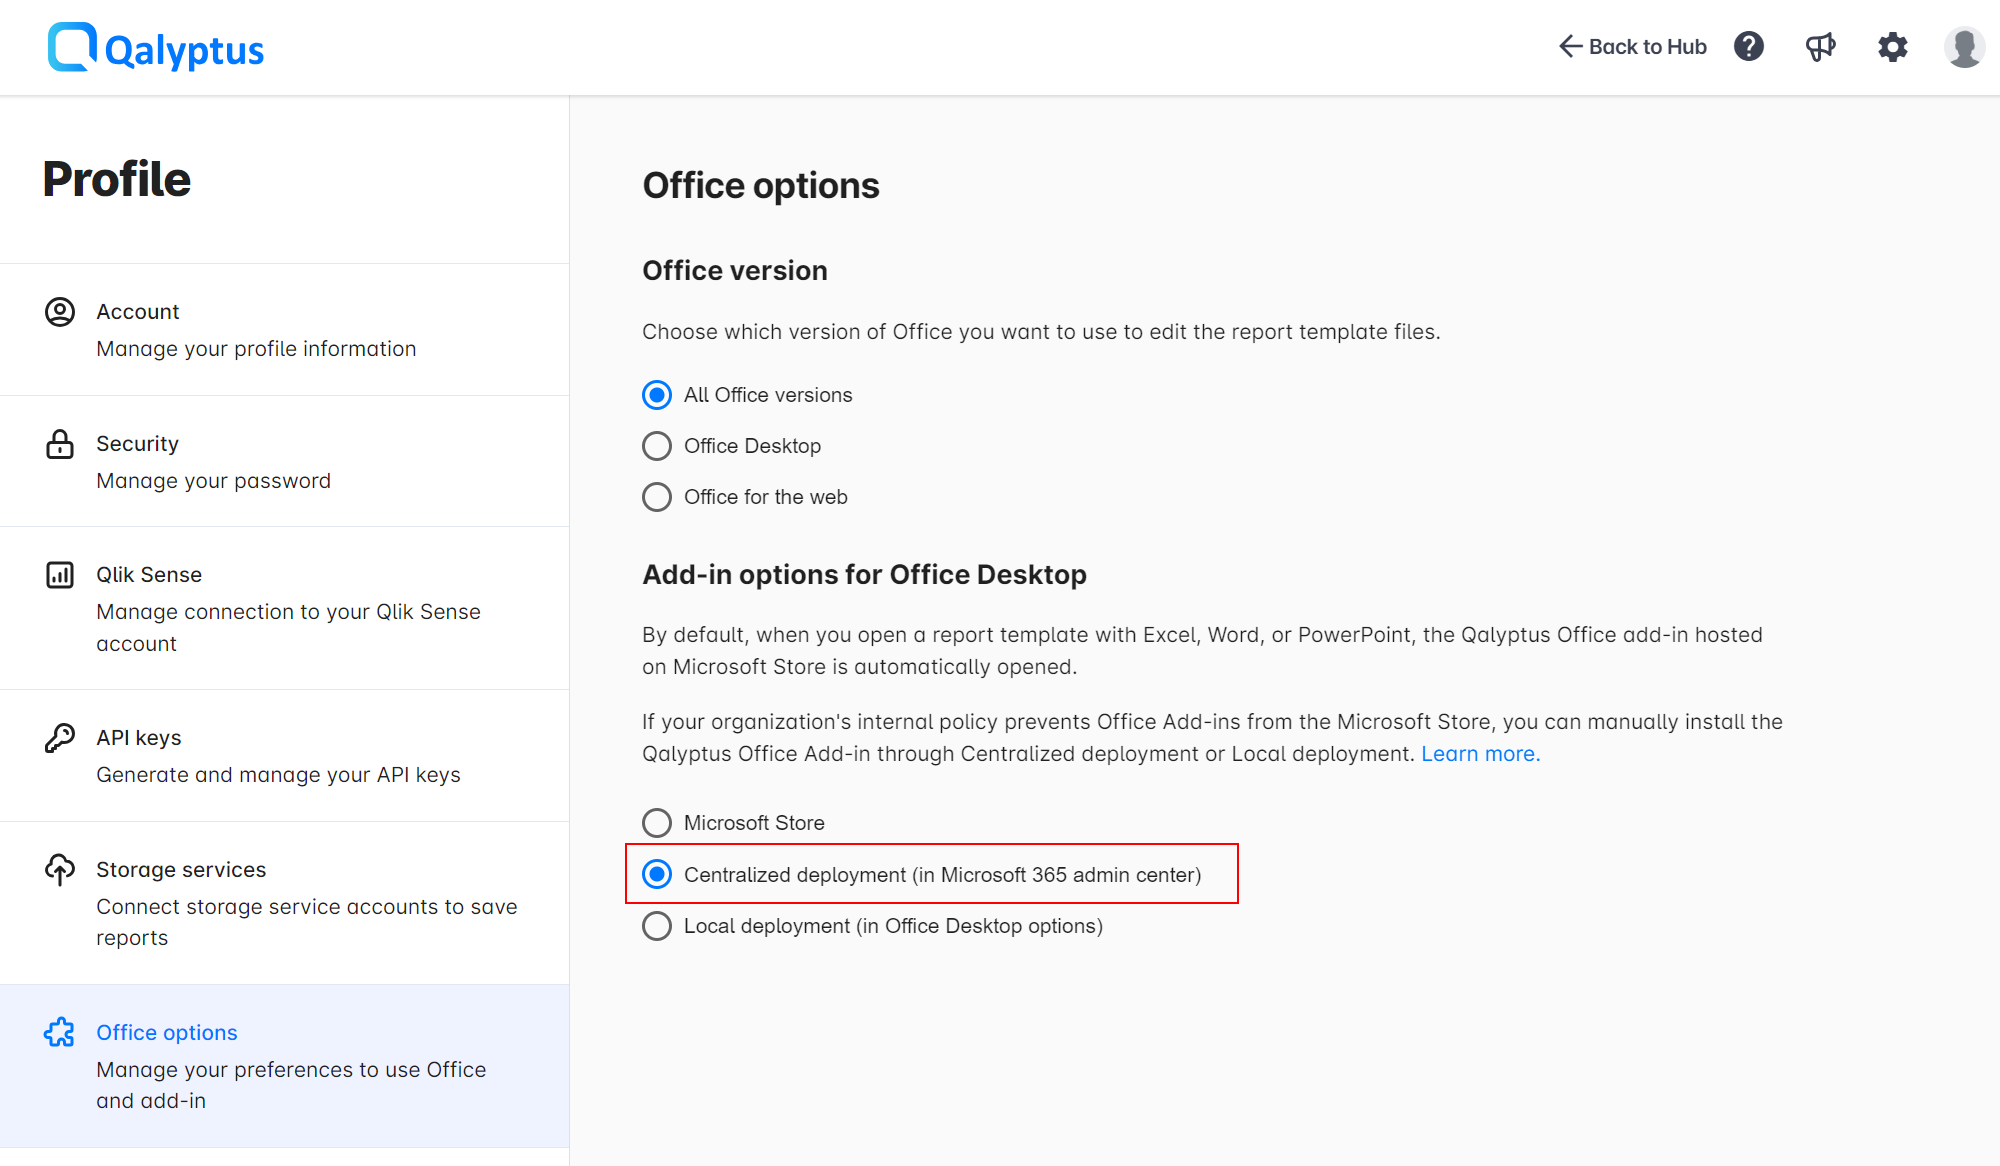 Qalyptus Cloud - Centralized deployment in the Microsoft 365 admin center